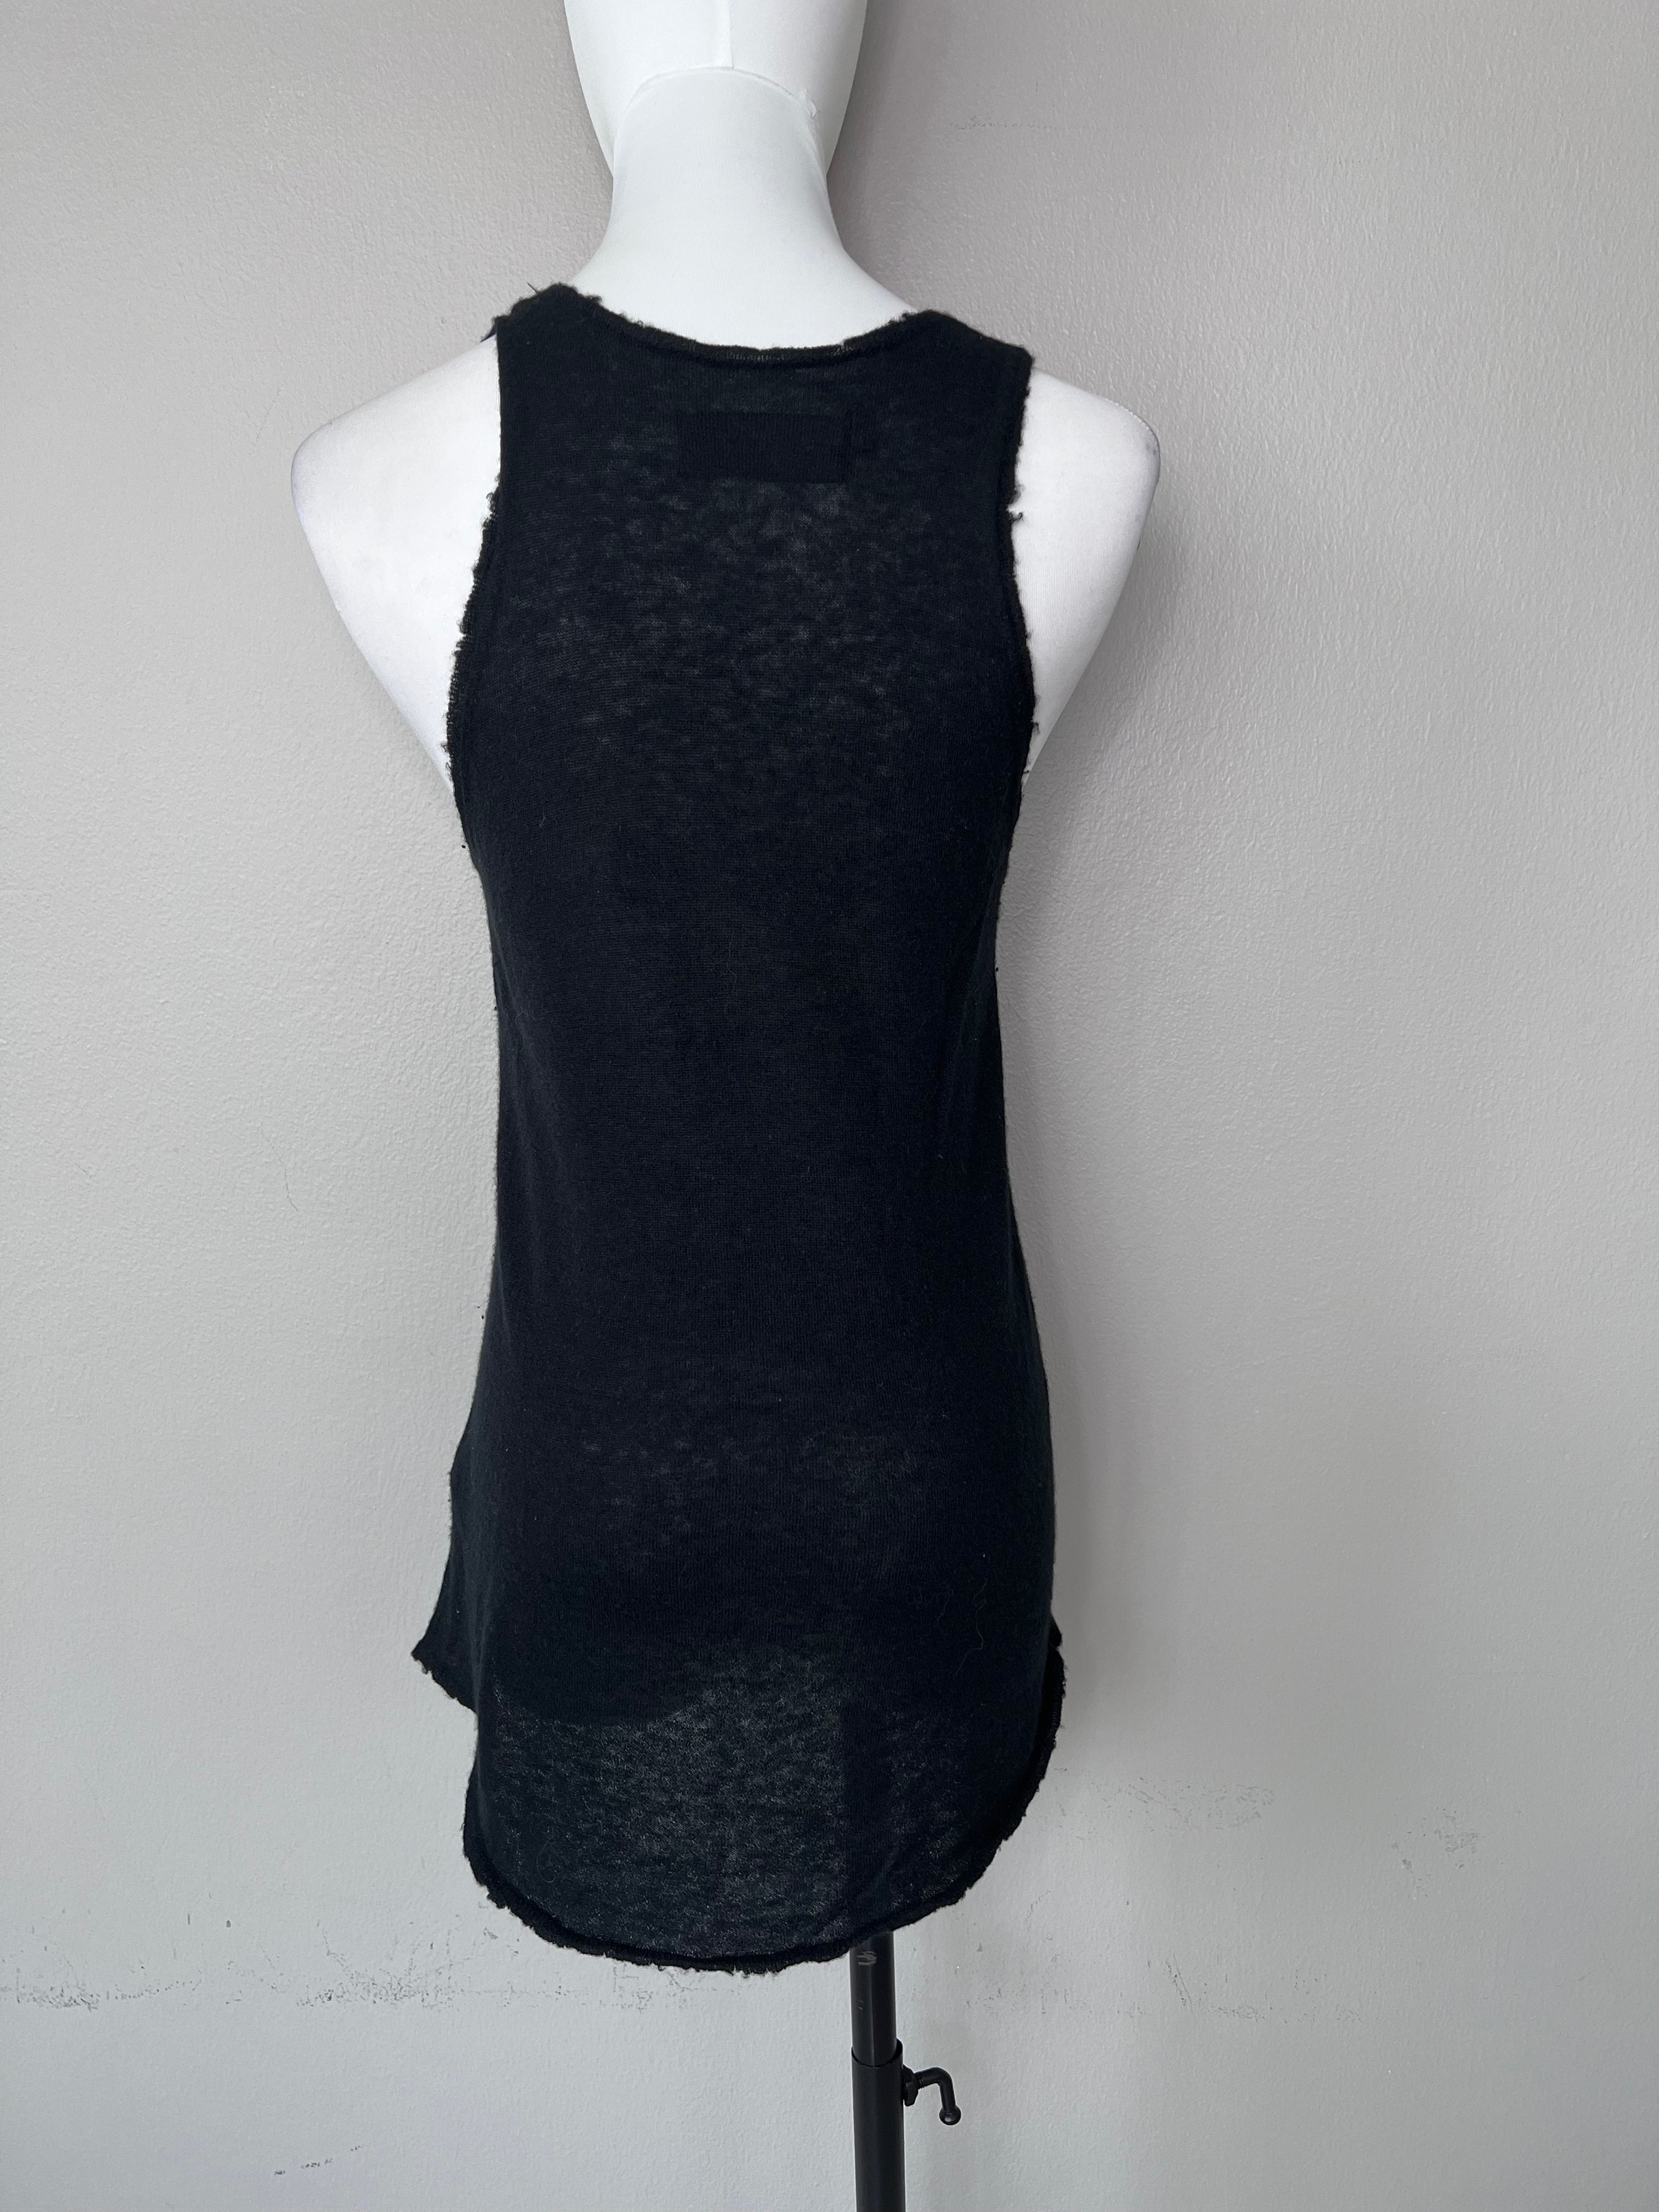 Black 100% cashmere scoop neck tank top with a rhinestone image at the front. - ZADIG & VOLTAIREDELUXE